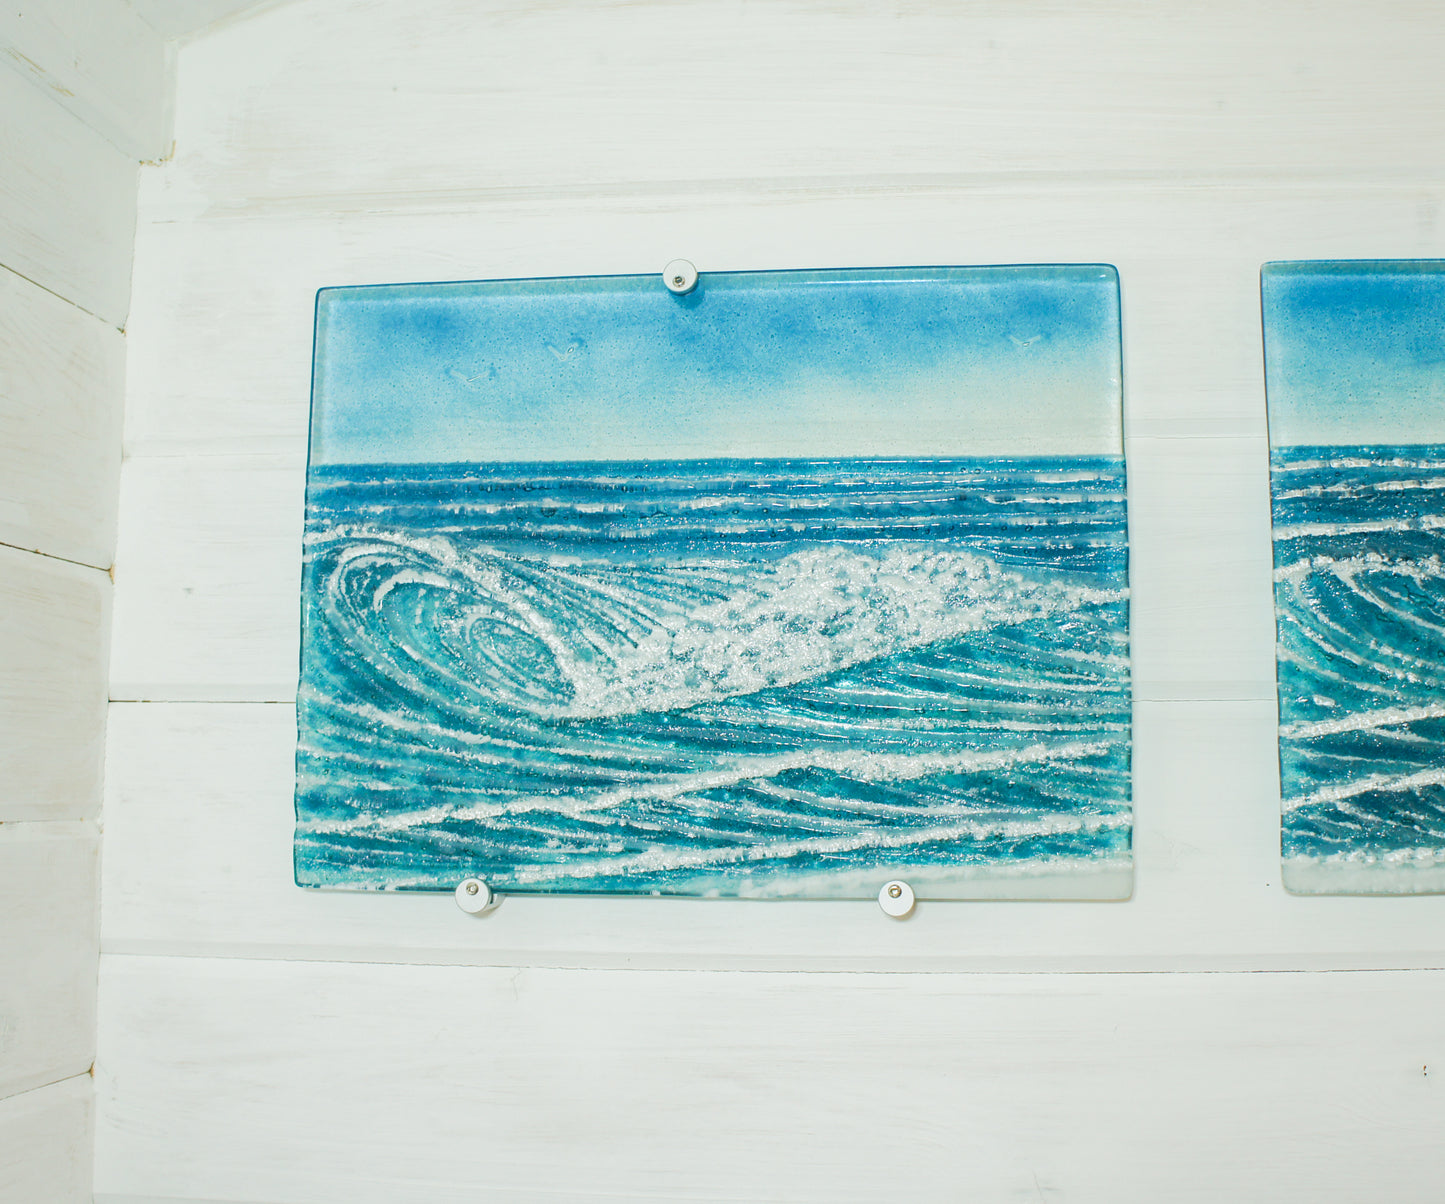 Small Triptych Coastal Wave Wall Panels - Left&Right 40x30cm (16x12")/Middle 43x30cm (17x12") with 9 fixings